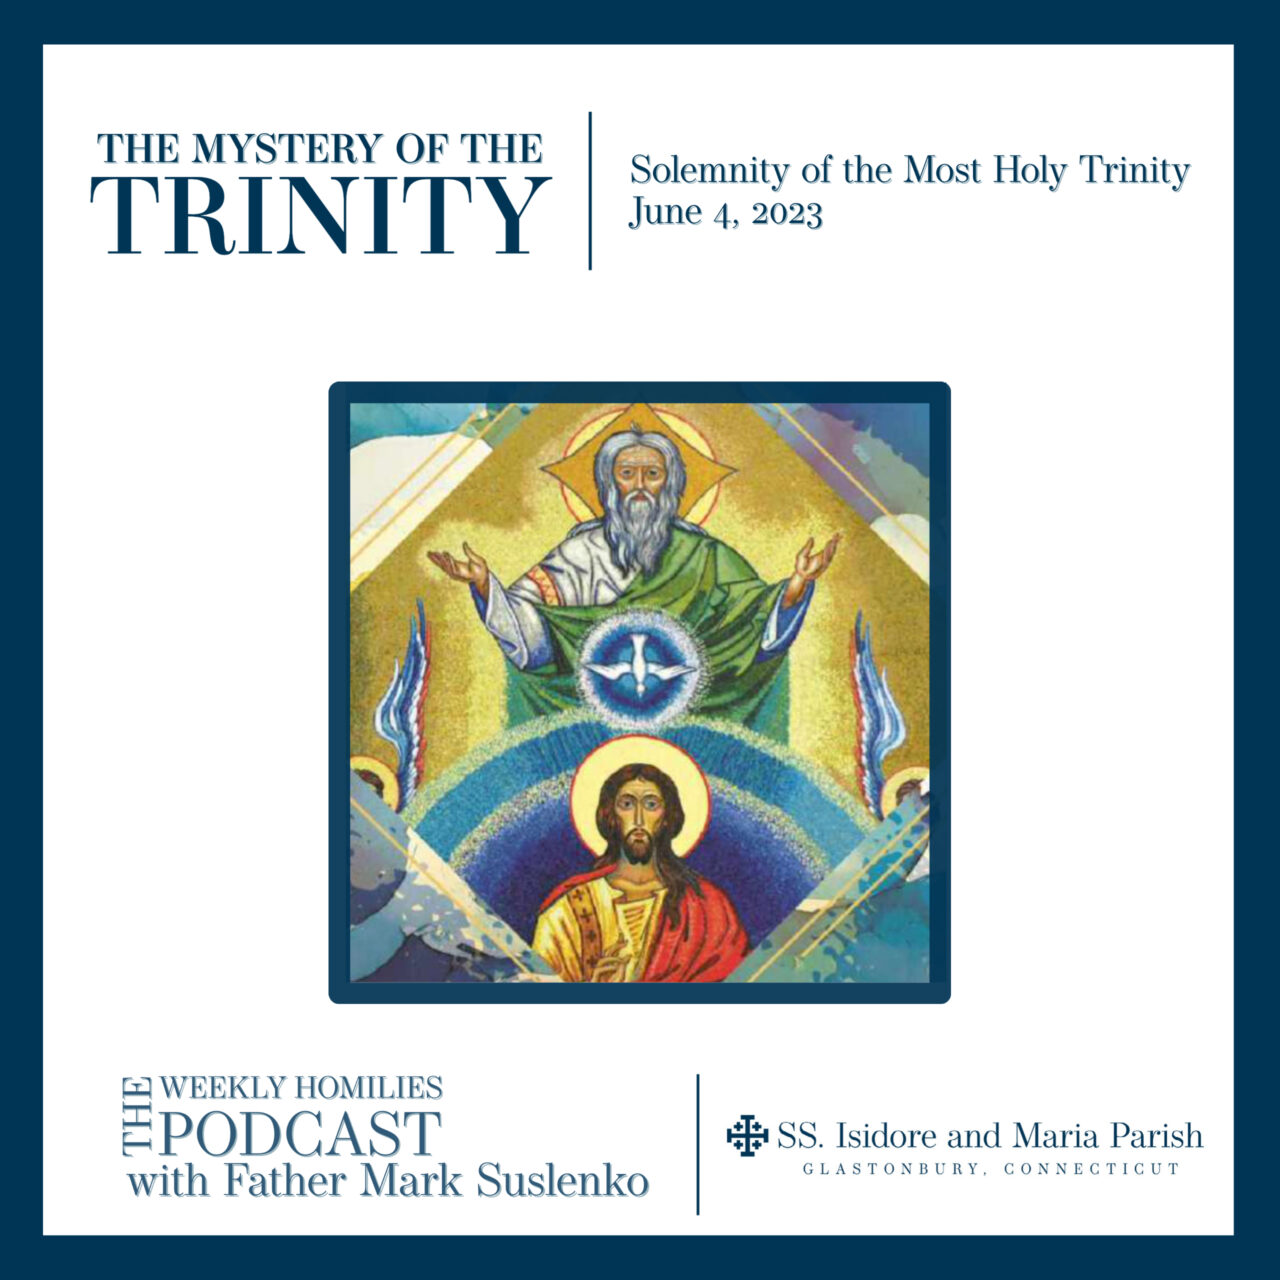 PODCAST: The Mystery of the Trinity